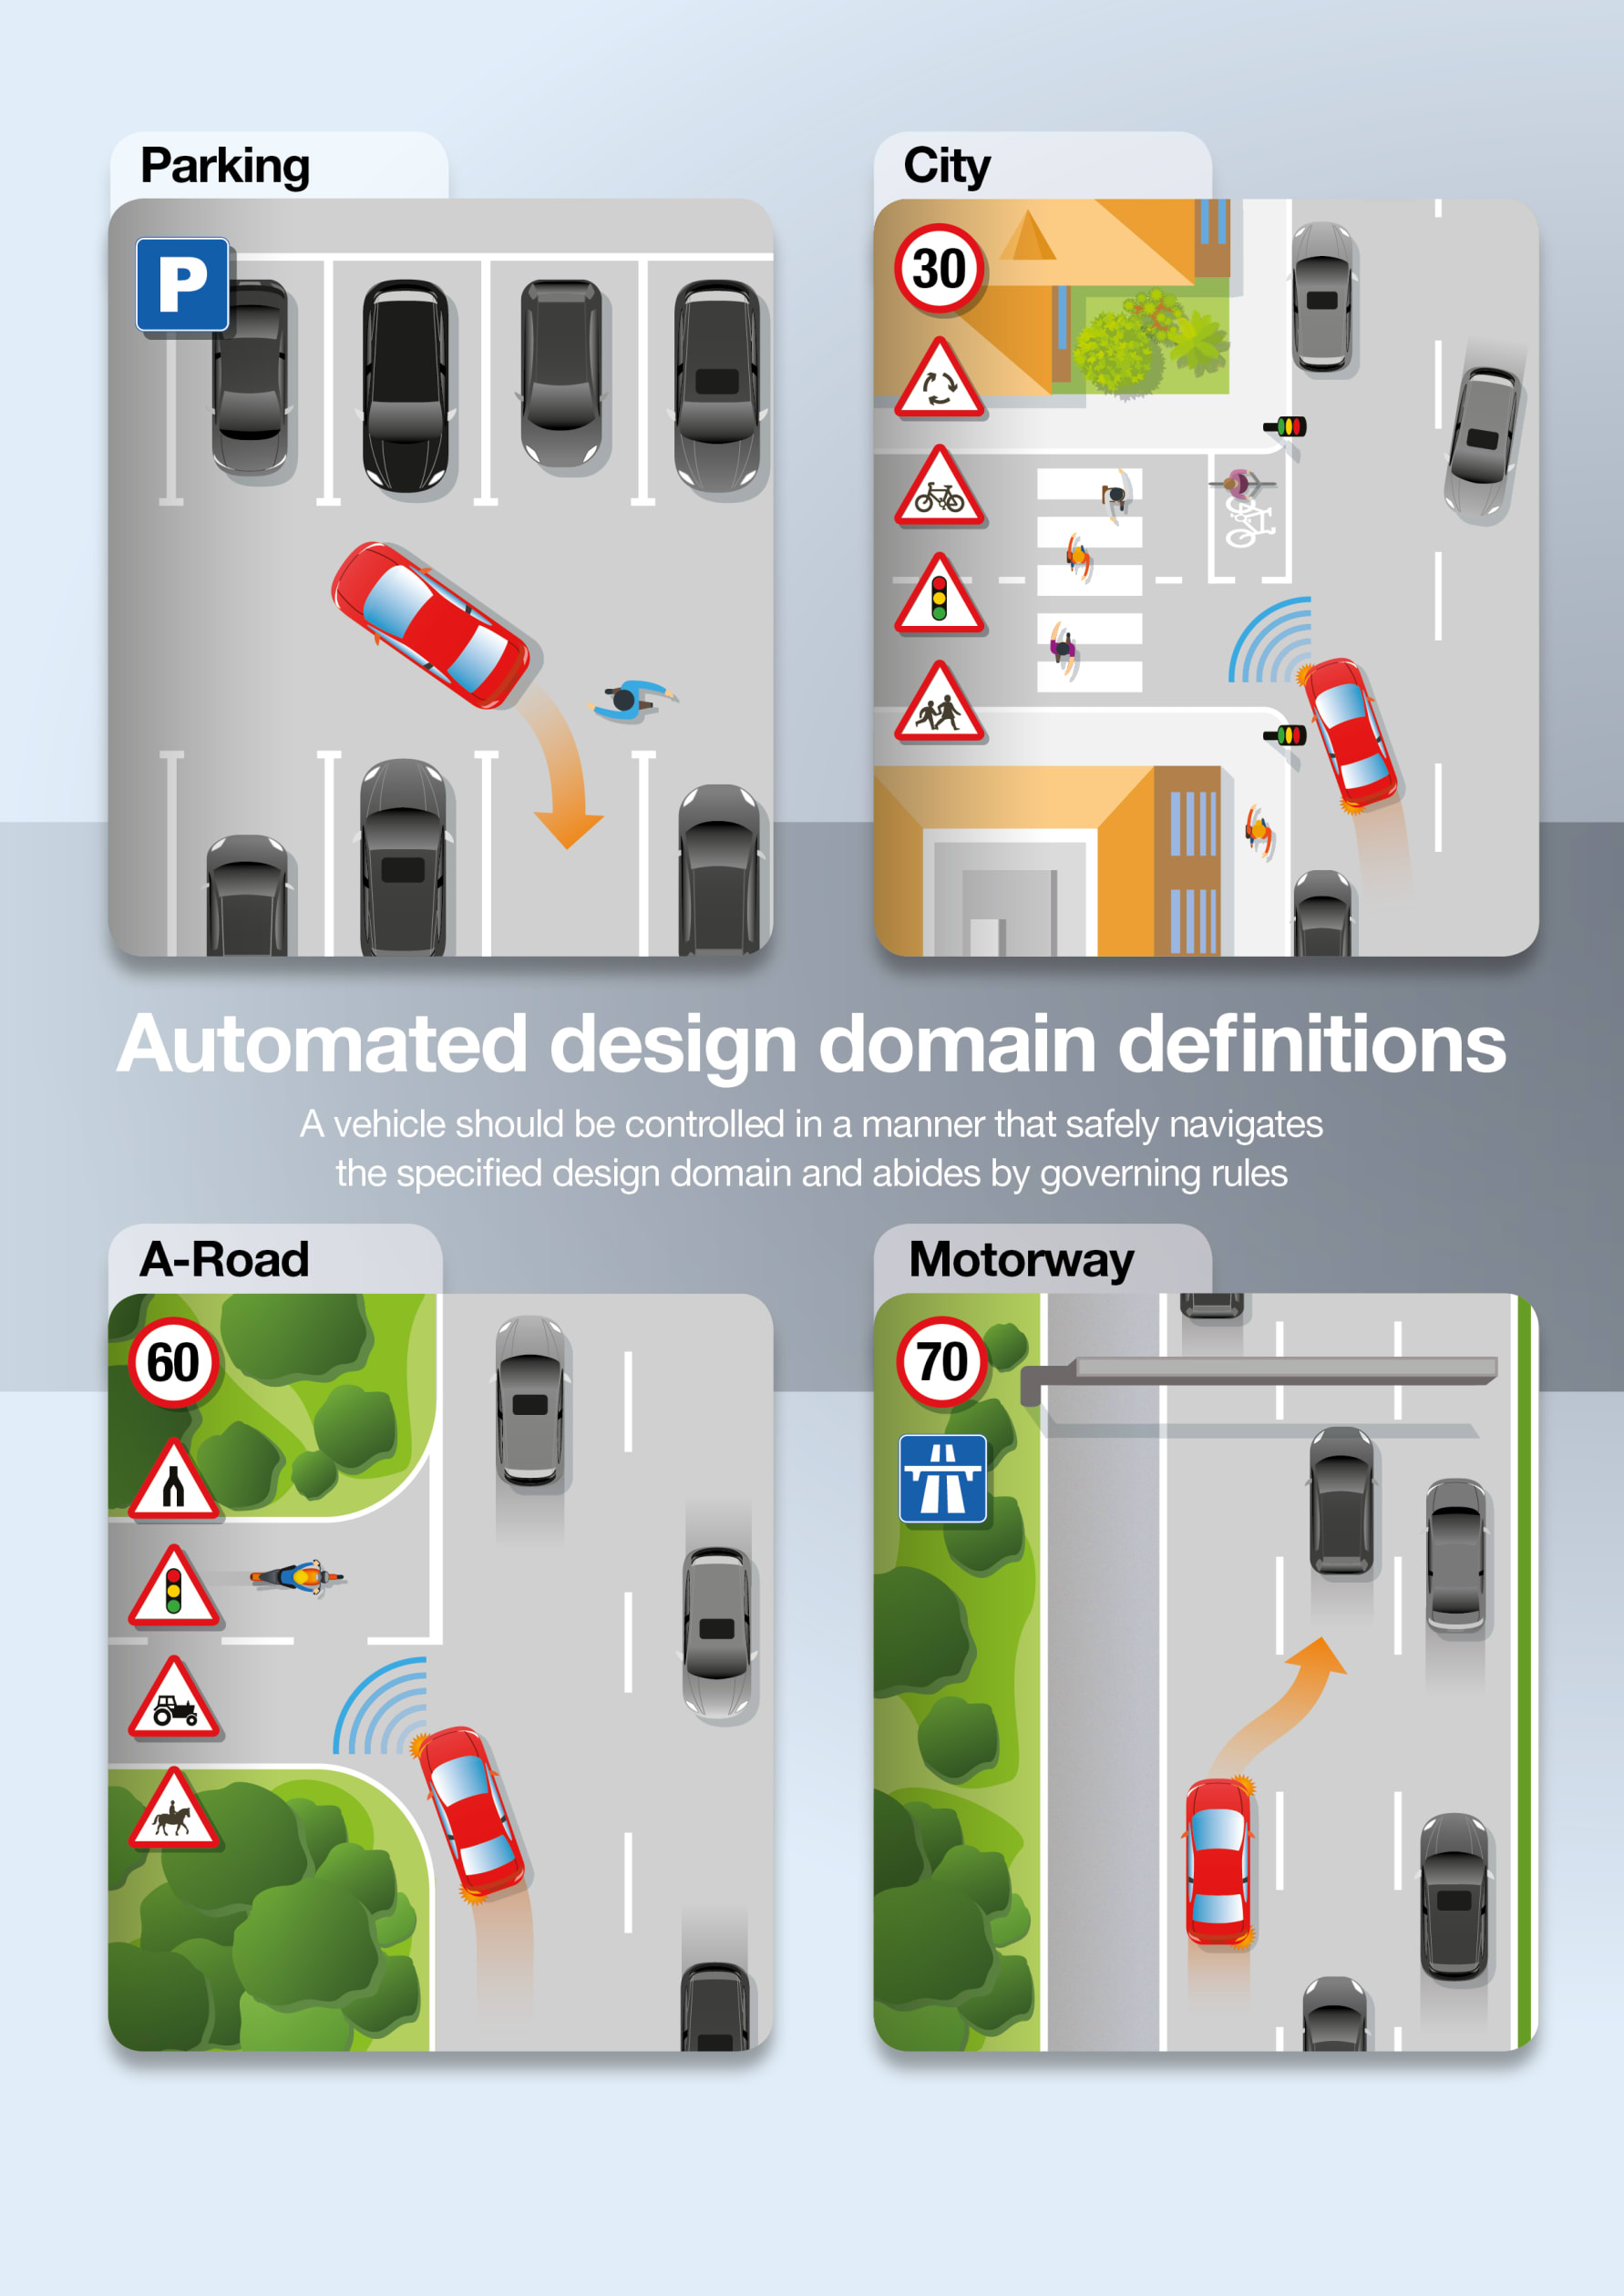 Automated design domain definitions - Parking, A-Road, City and Motorway